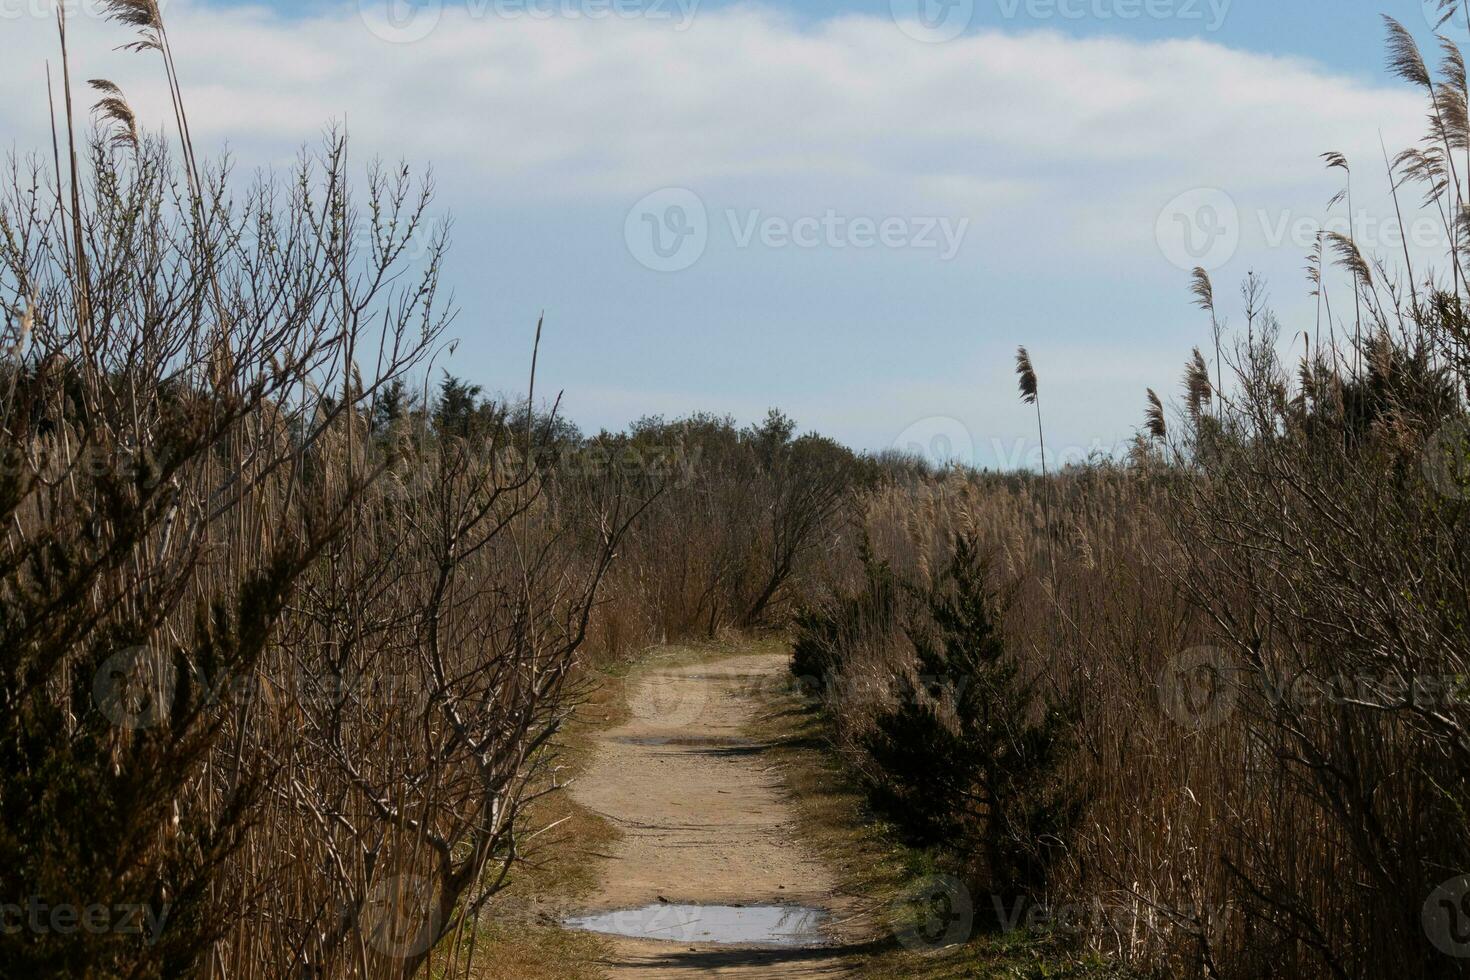 I love the look of this beautiful dirt path running through the brown foliage. This image almost has a Fall or beach look to it. The tall overgrown grass looks pretty in this nature preserve. photo